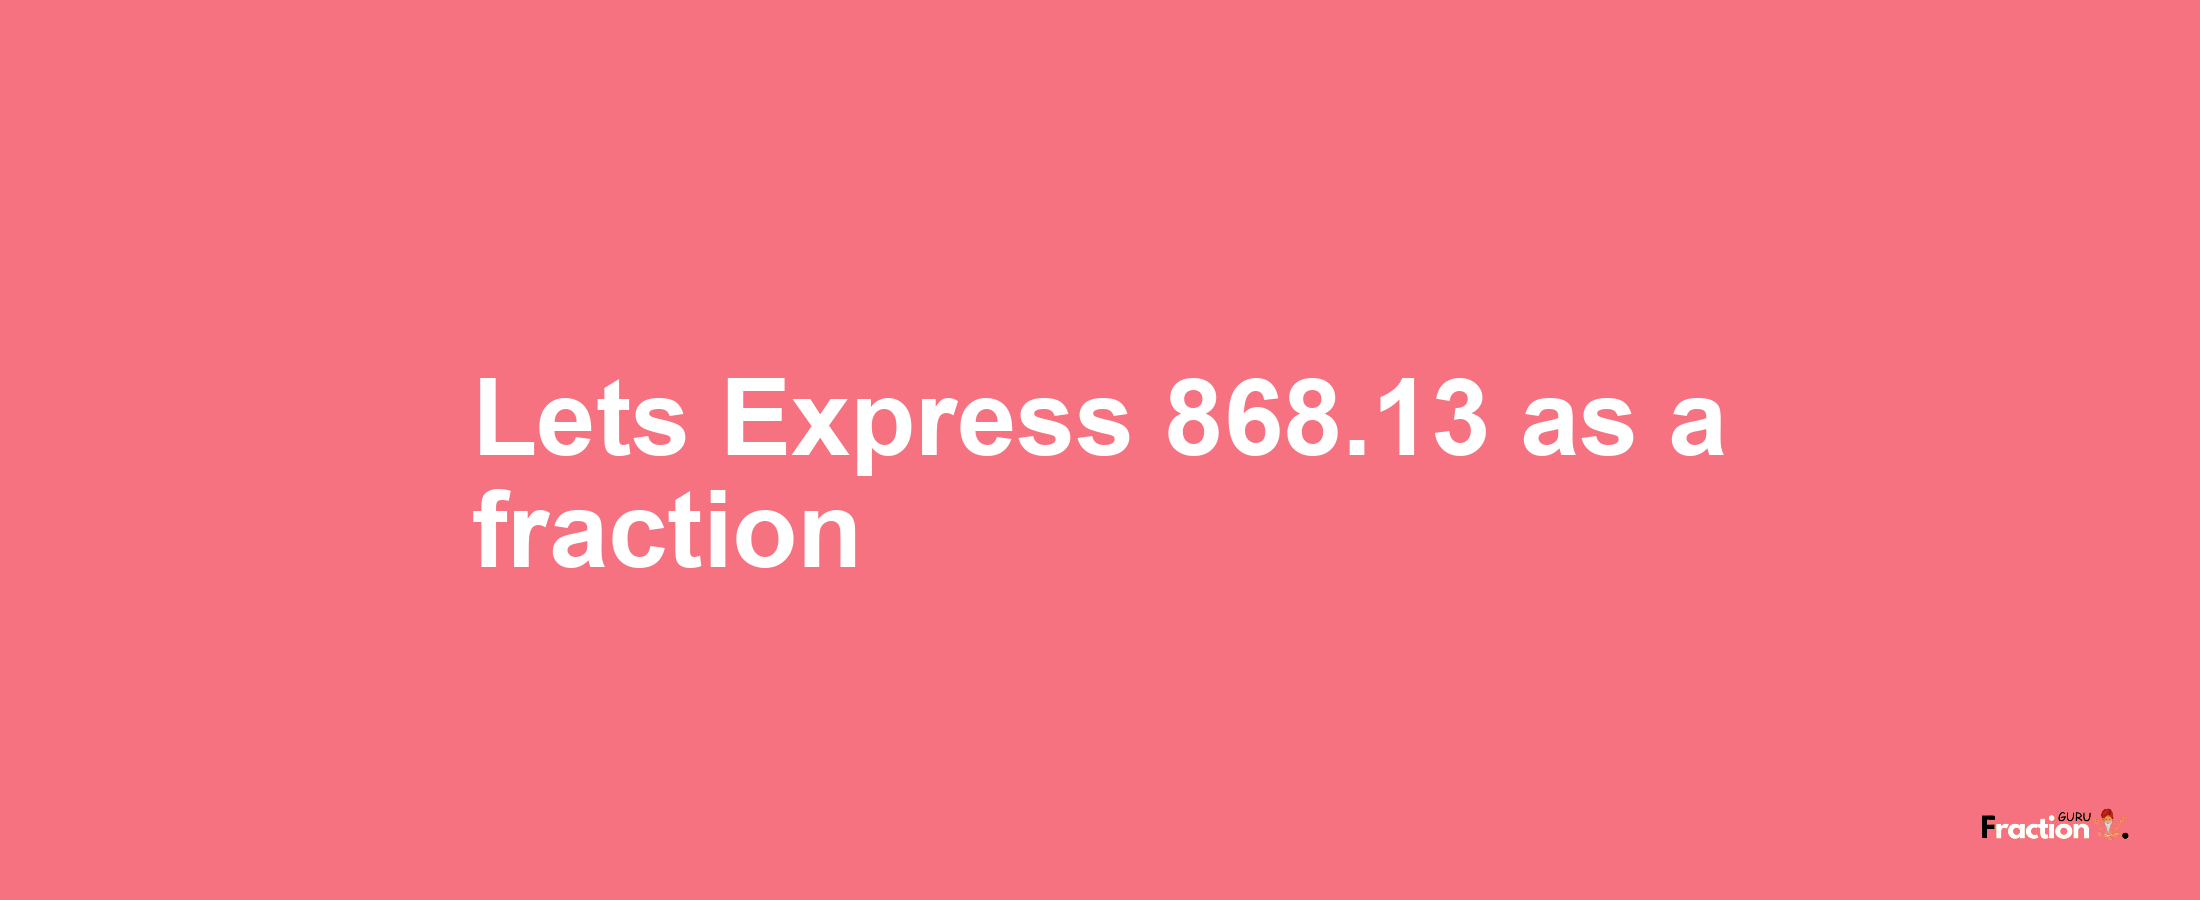 Lets Express 868.13 as afraction